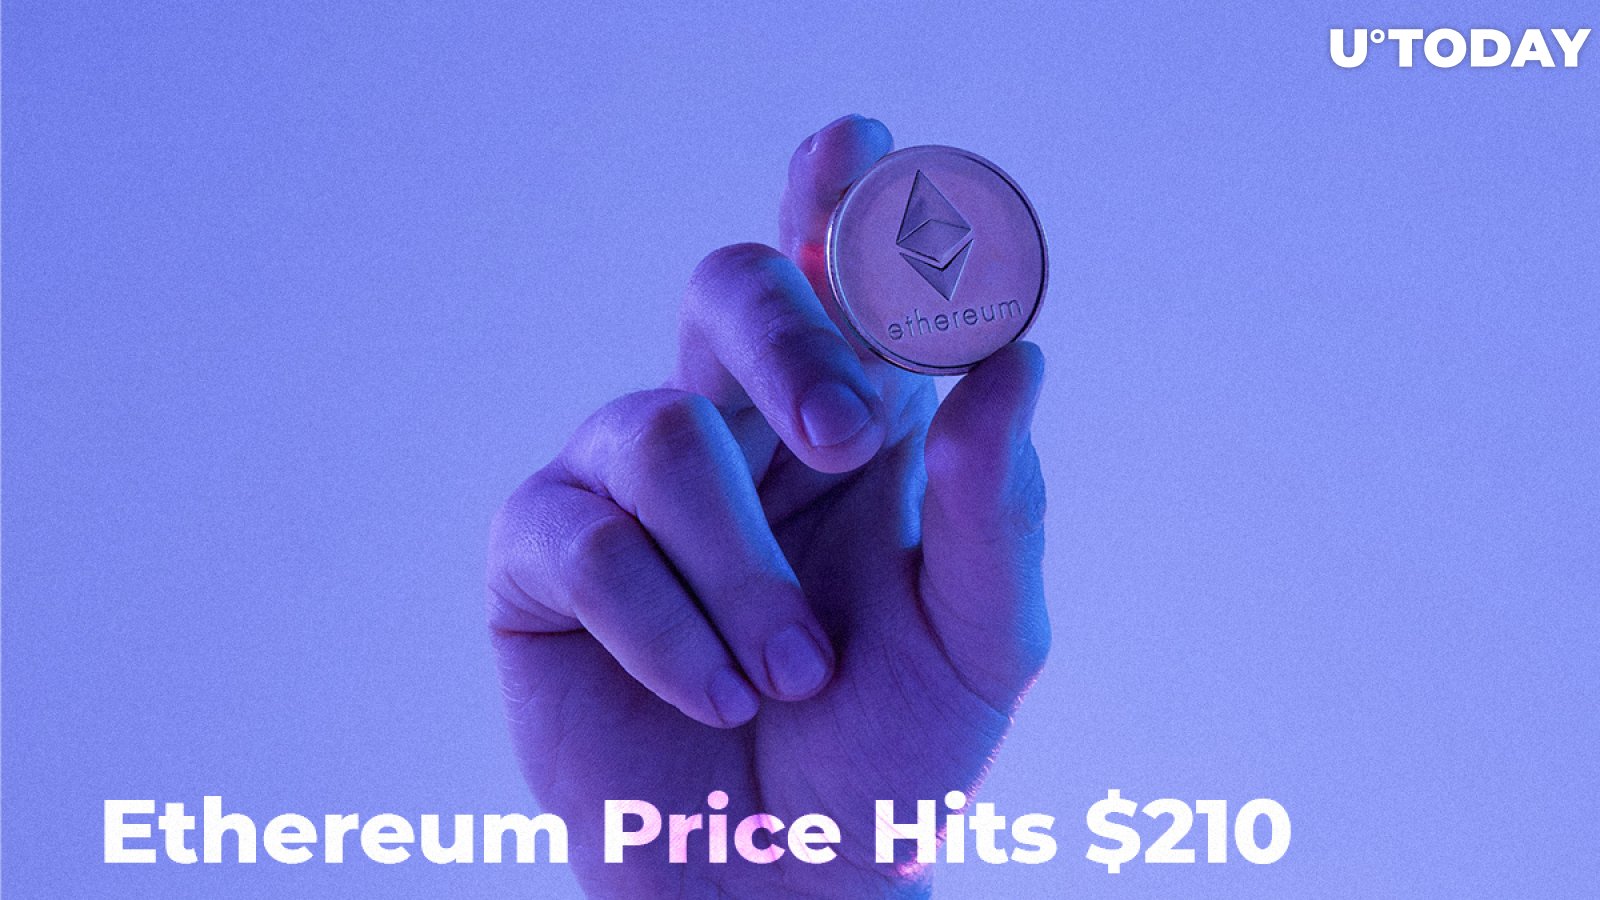 Ethereum Price (ETH) Hits $210, Will the Rally Continue to $220?